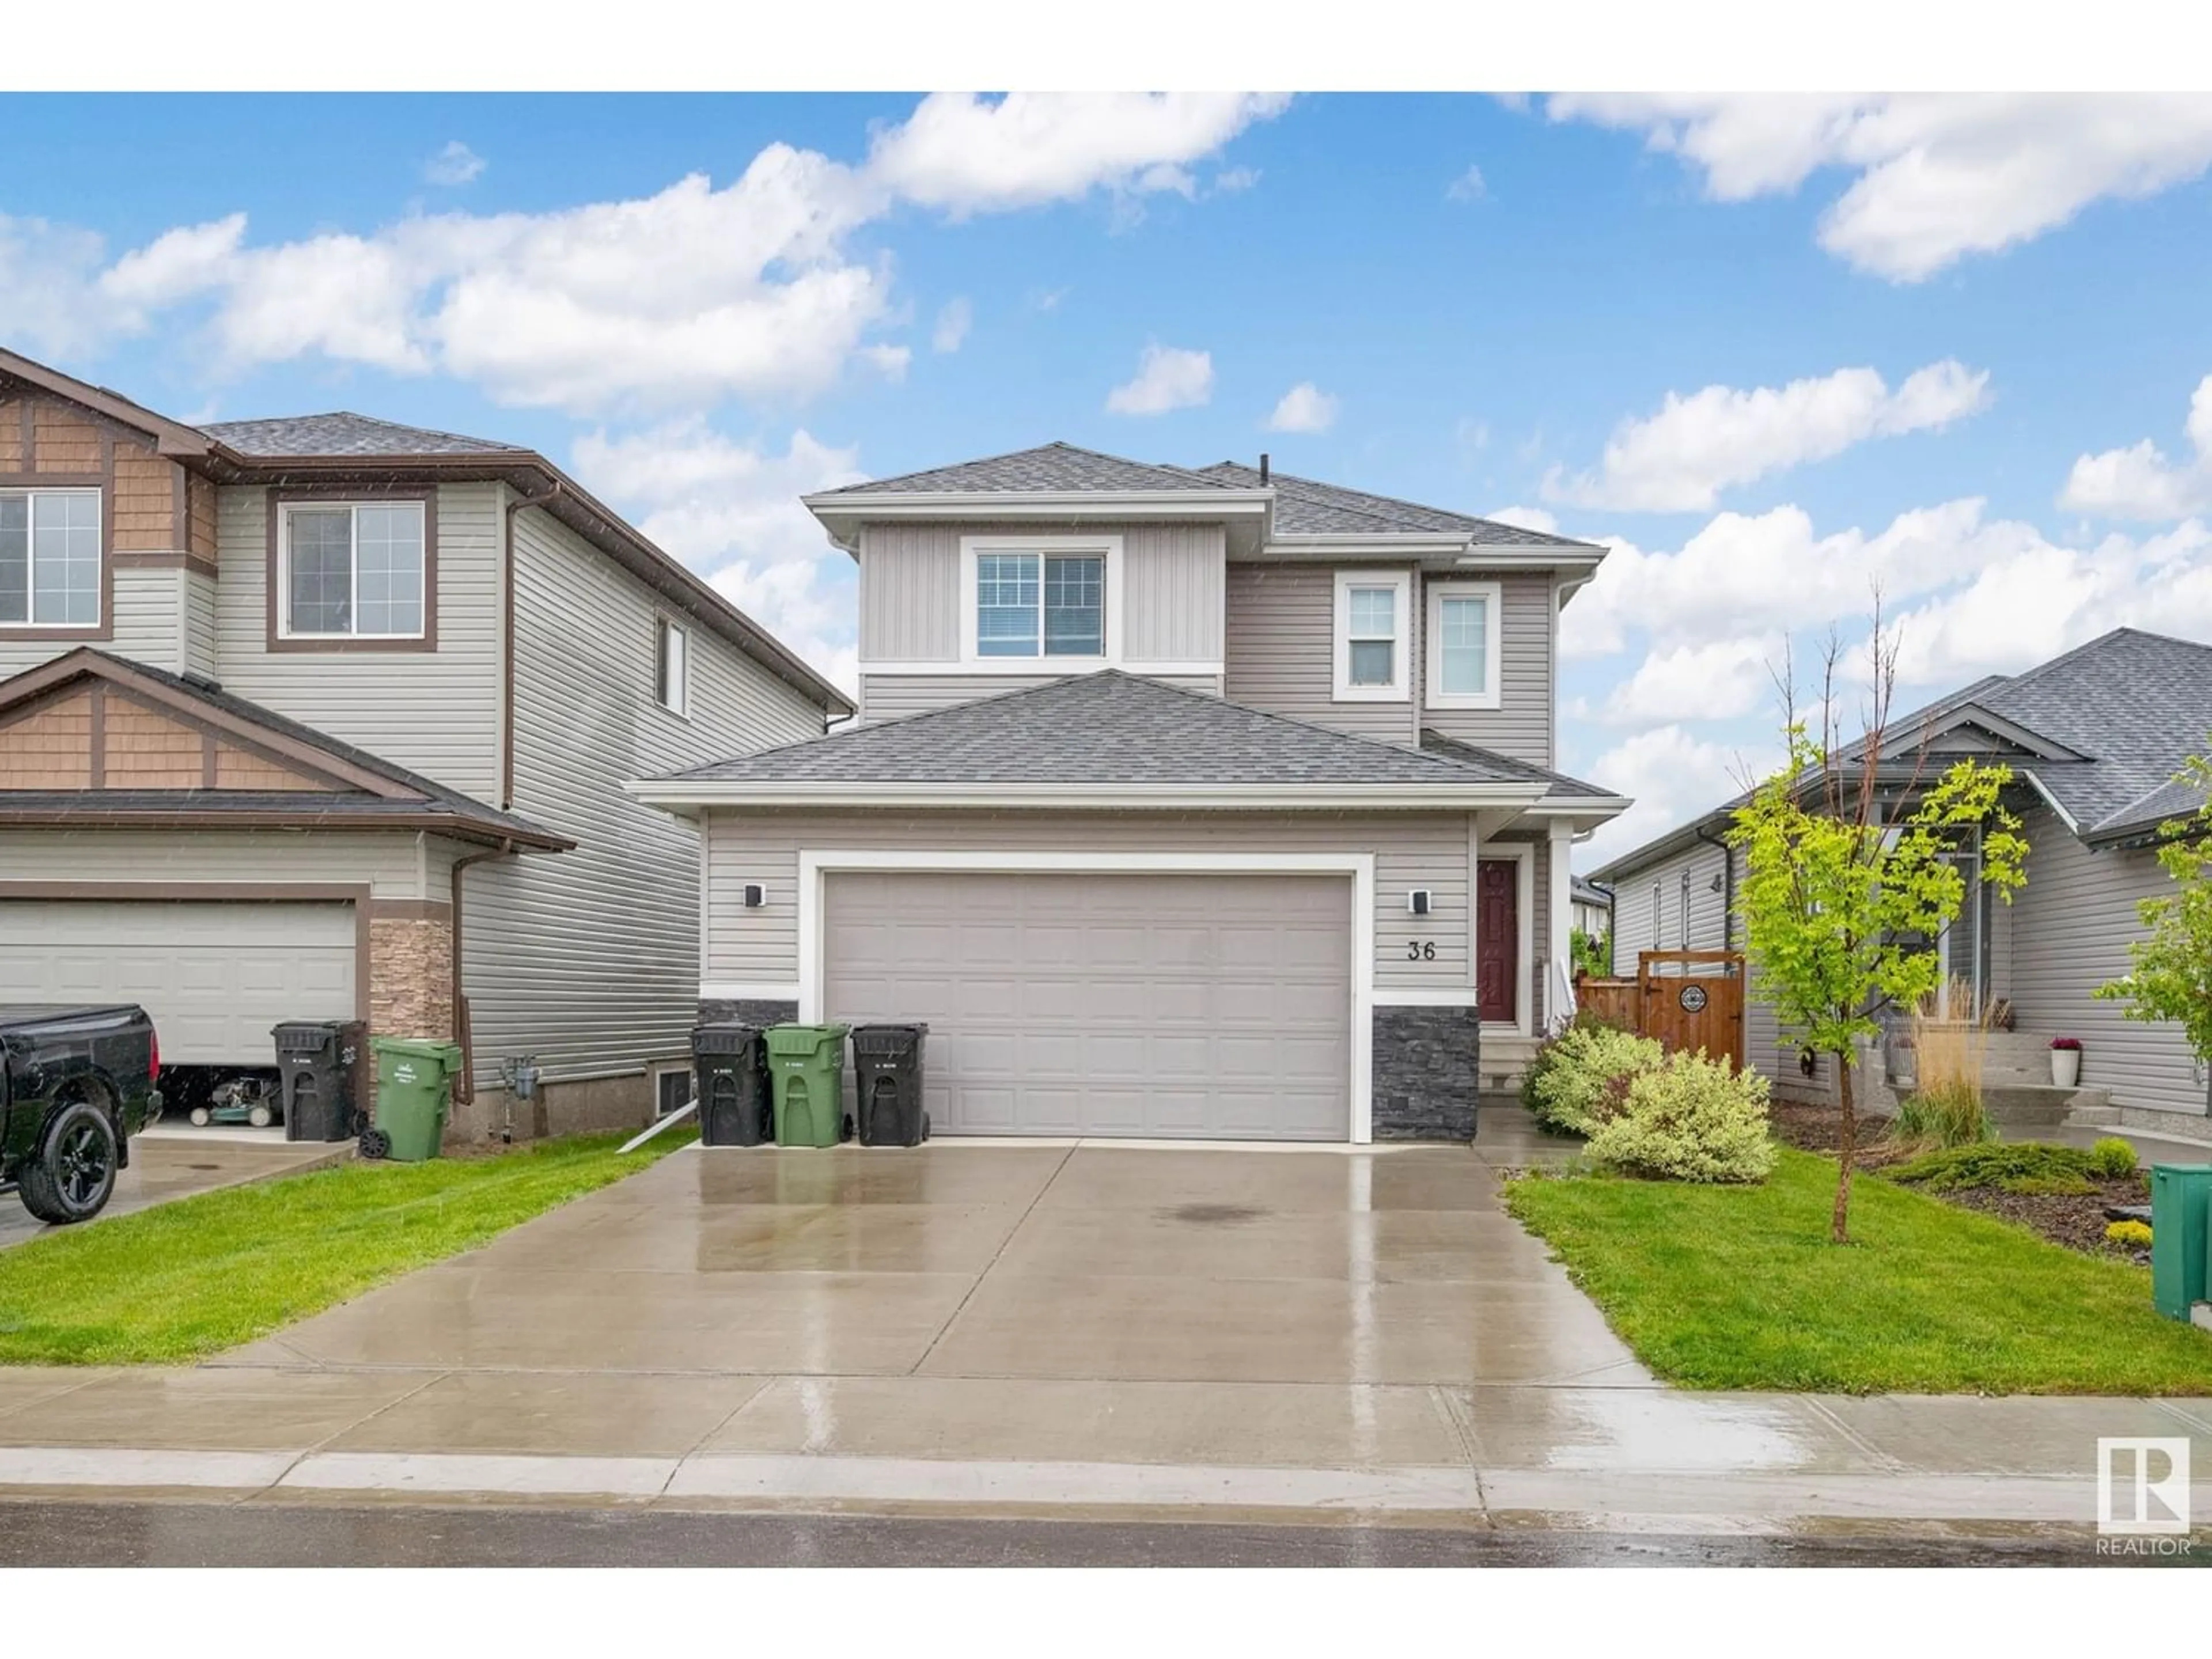 Frontside or backside of a home for 36 Roberts CL, Leduc Alberta T9E1K9